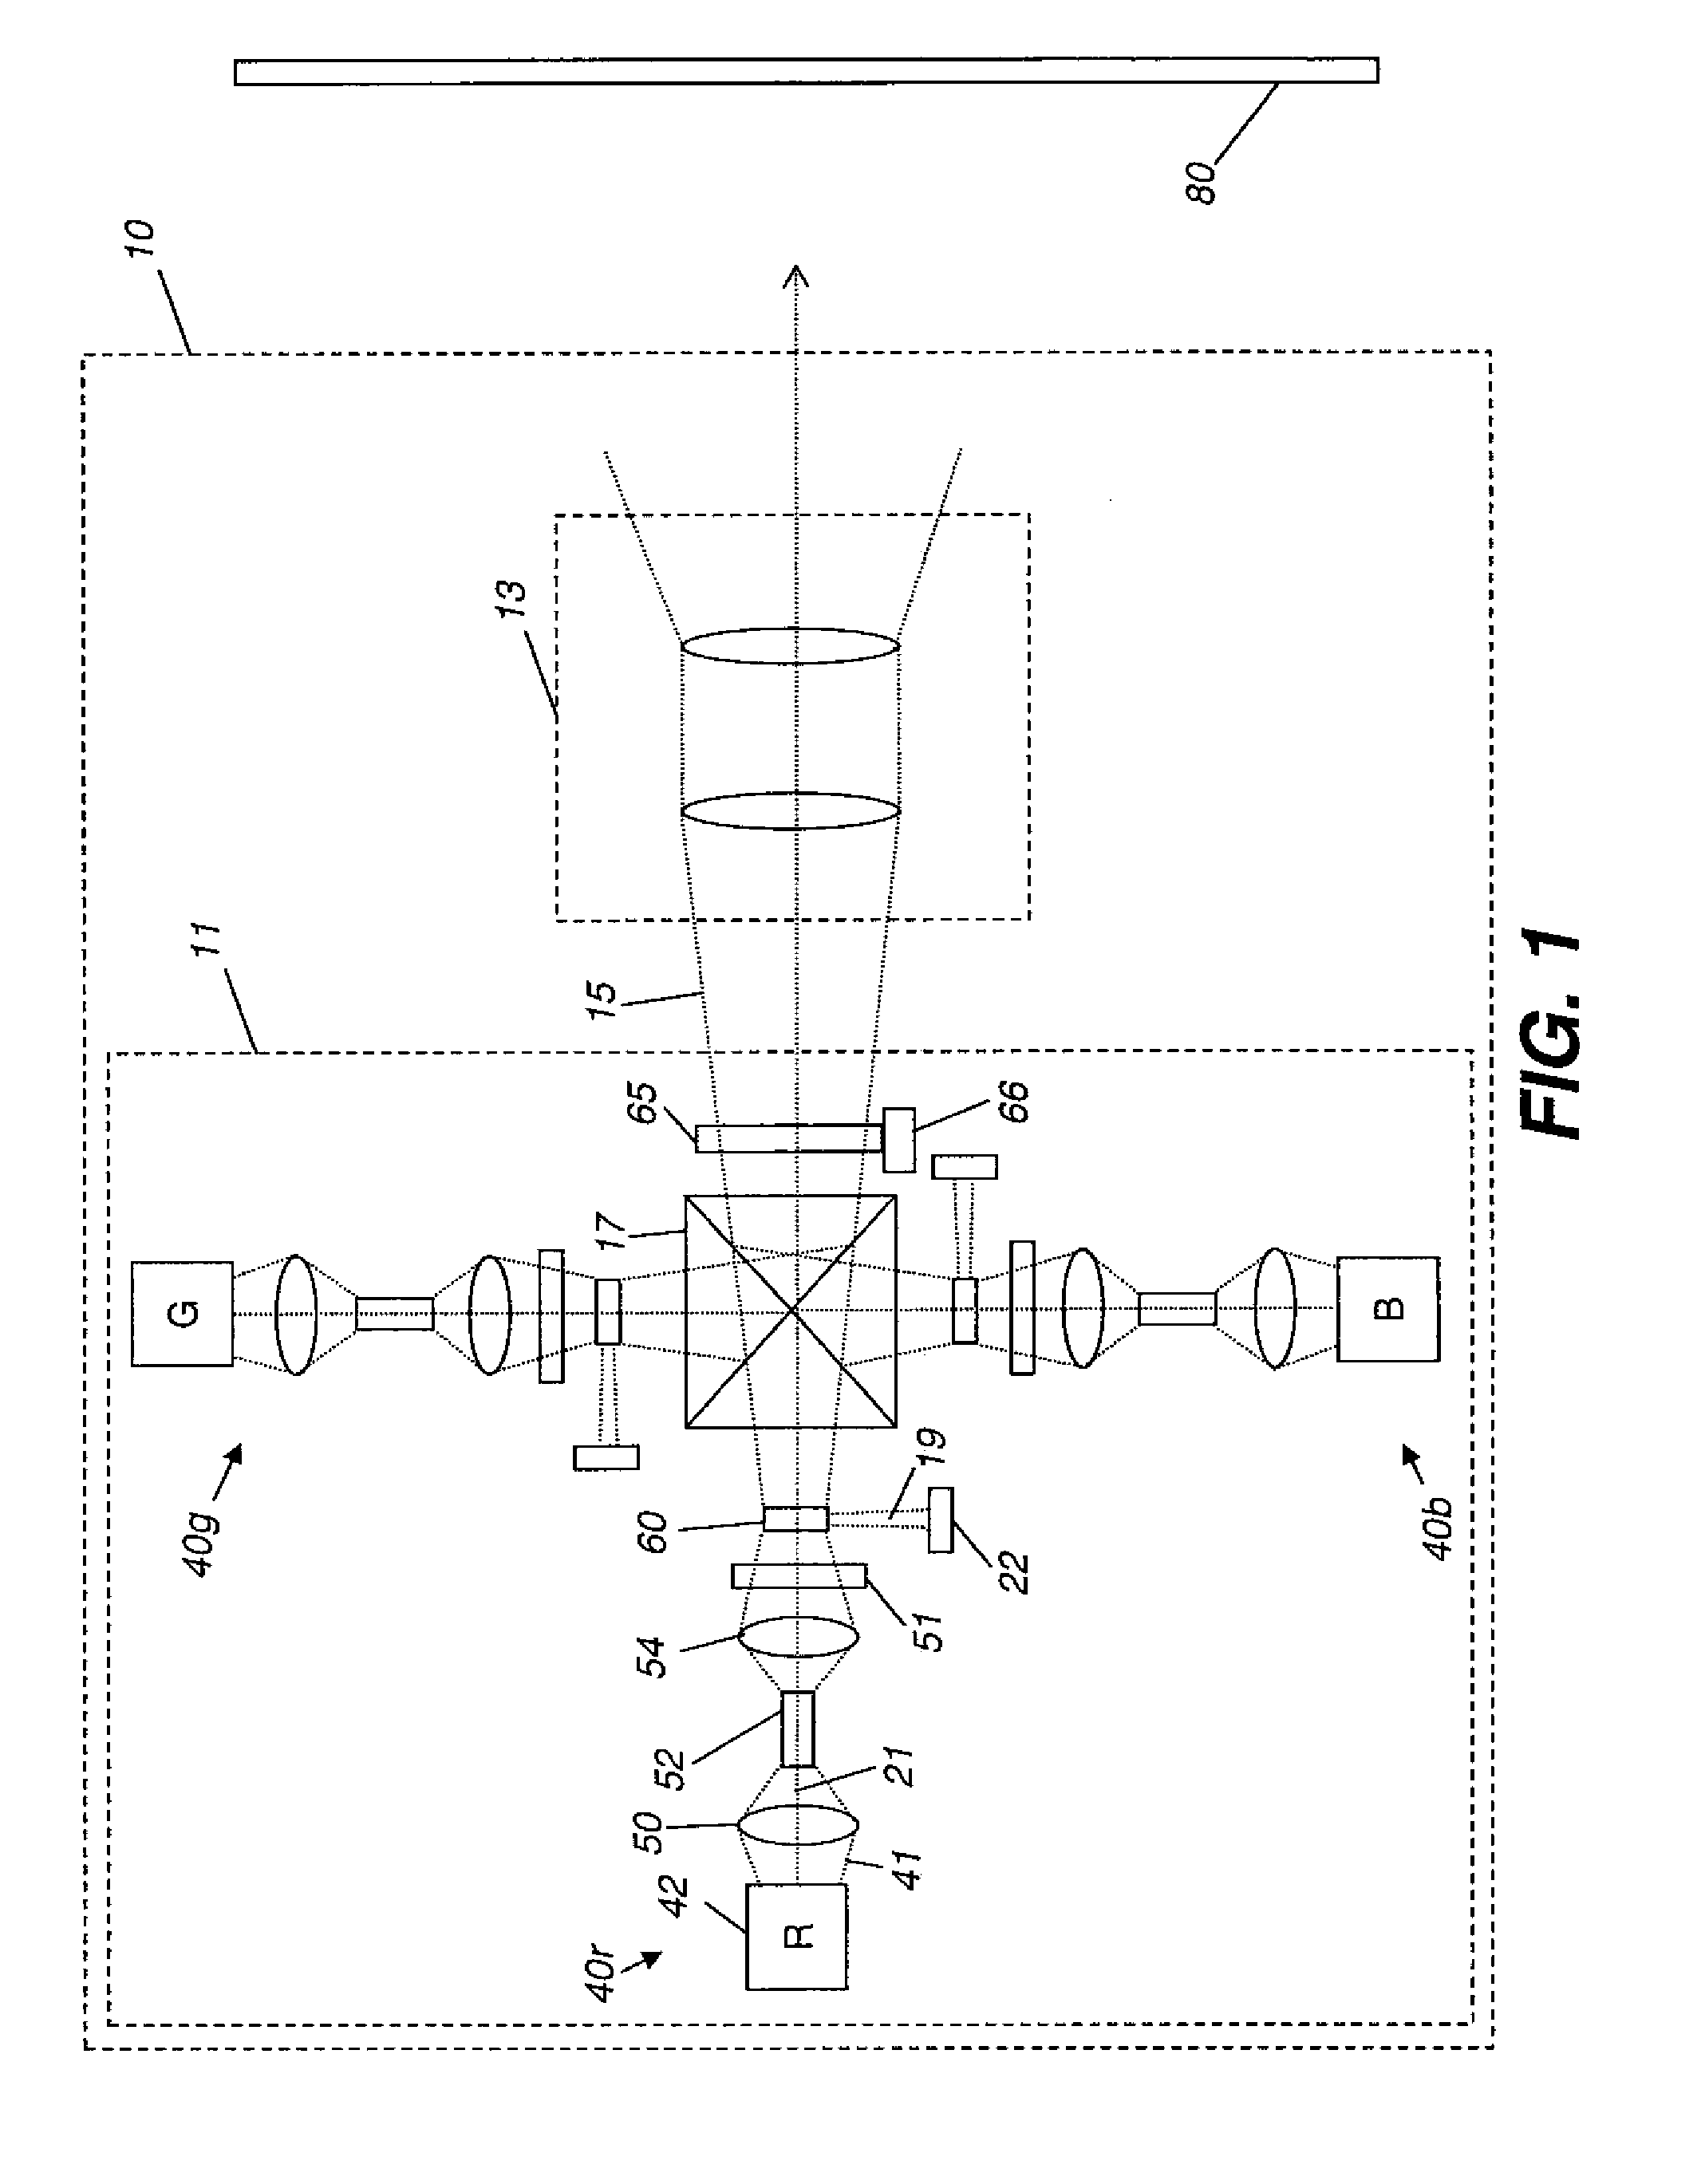 Hierarchical light intensity control in light projector